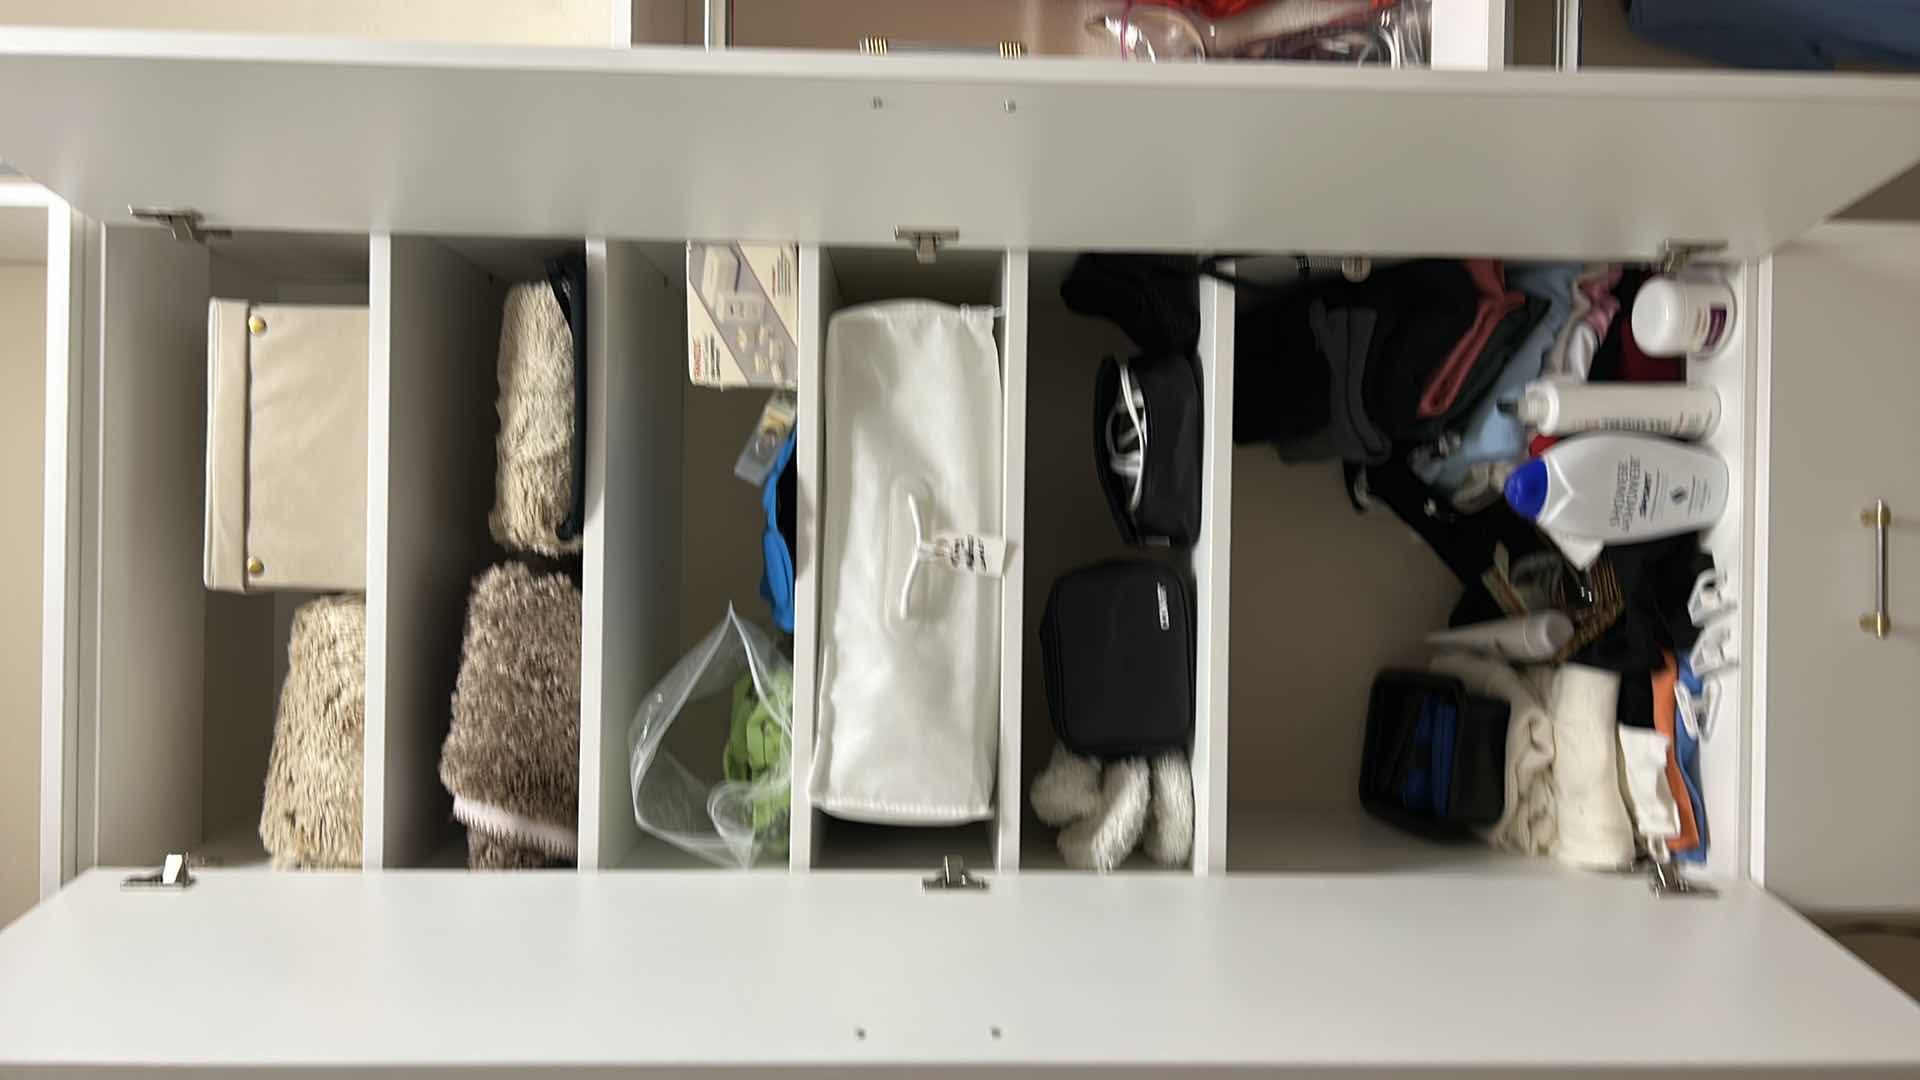 Photo 9 of Contents of cabinet in walk-in closet